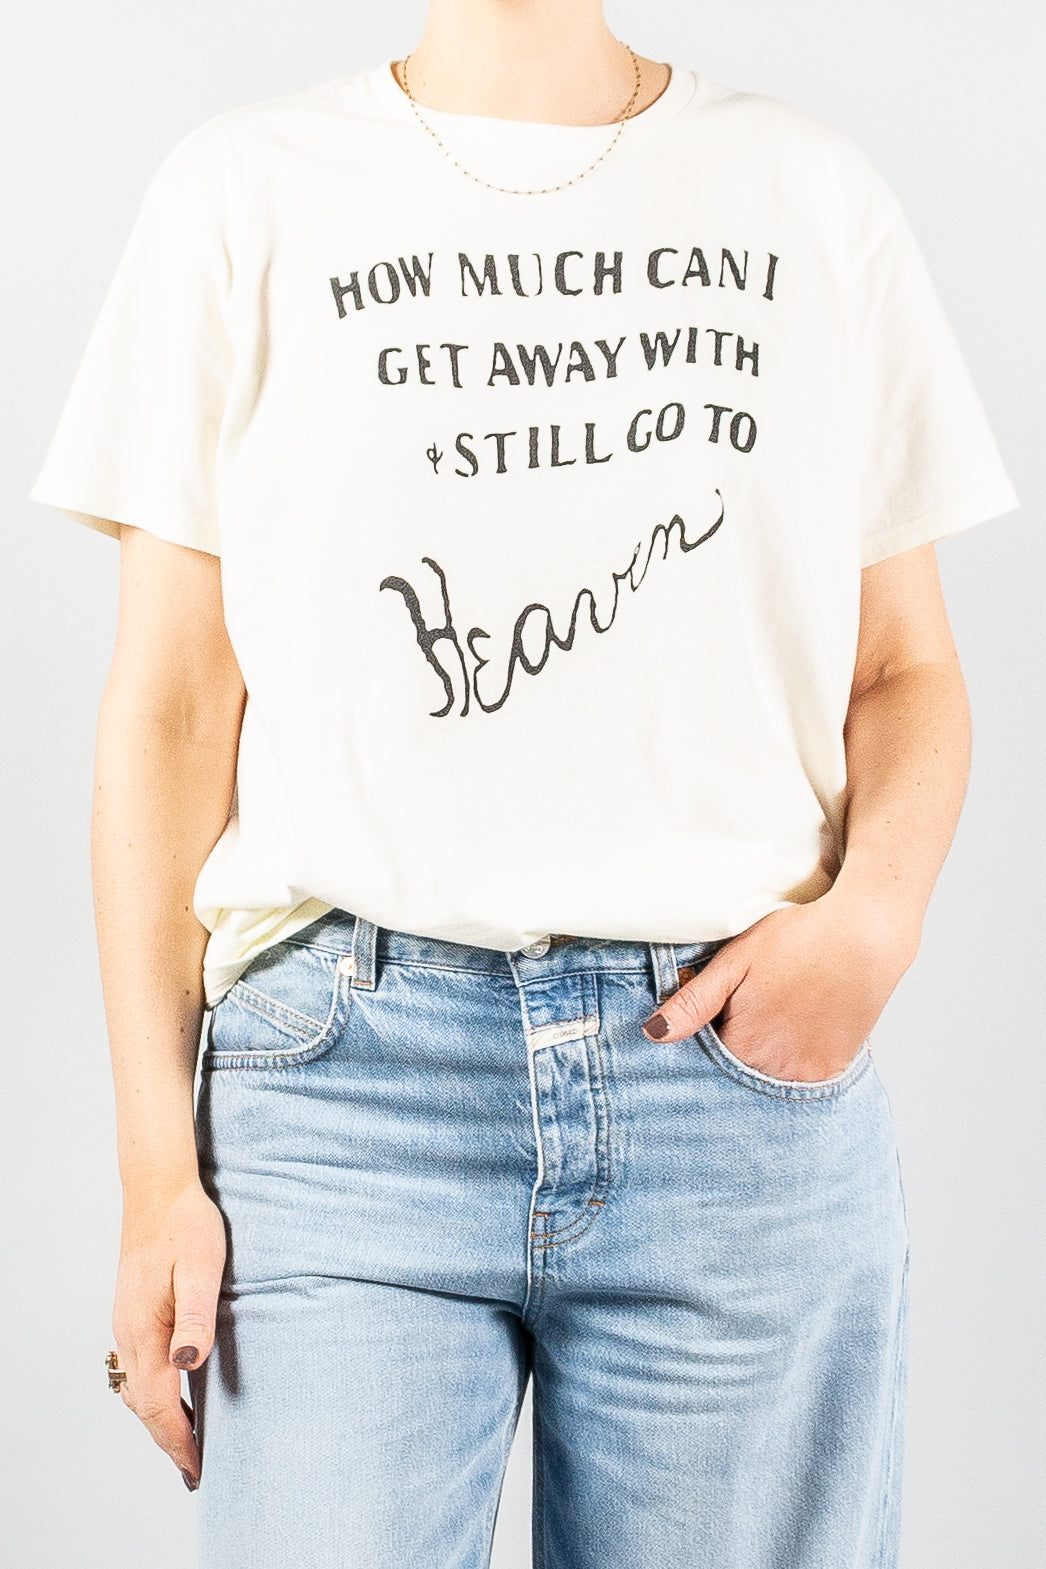 R13 Denim 'How Much Can I Get Away With' Boy T-Shirt-Tops-Misch-Boutique-Vancouver-Canada-misch.ca